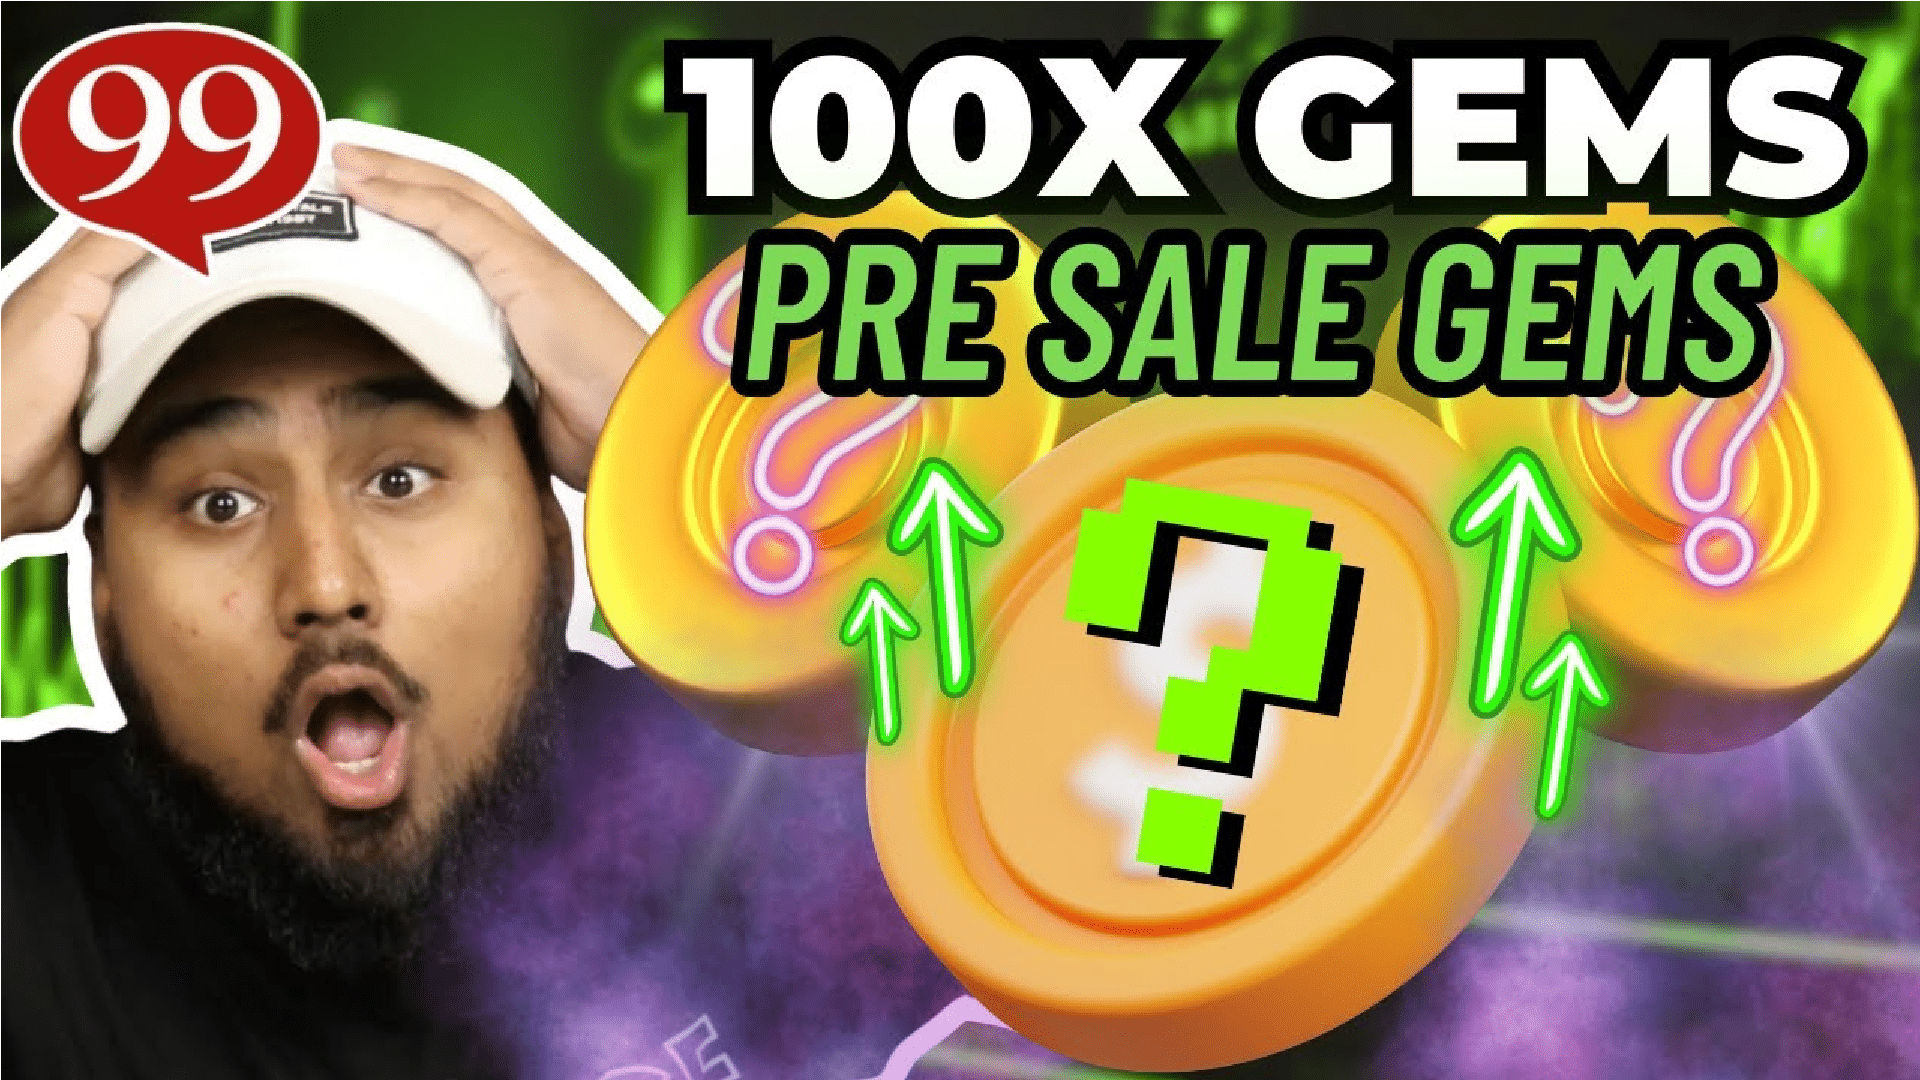 Top 3 Presale Gems with 100x Potential – $5SCAPE, $DOGE20, and $SLOTH